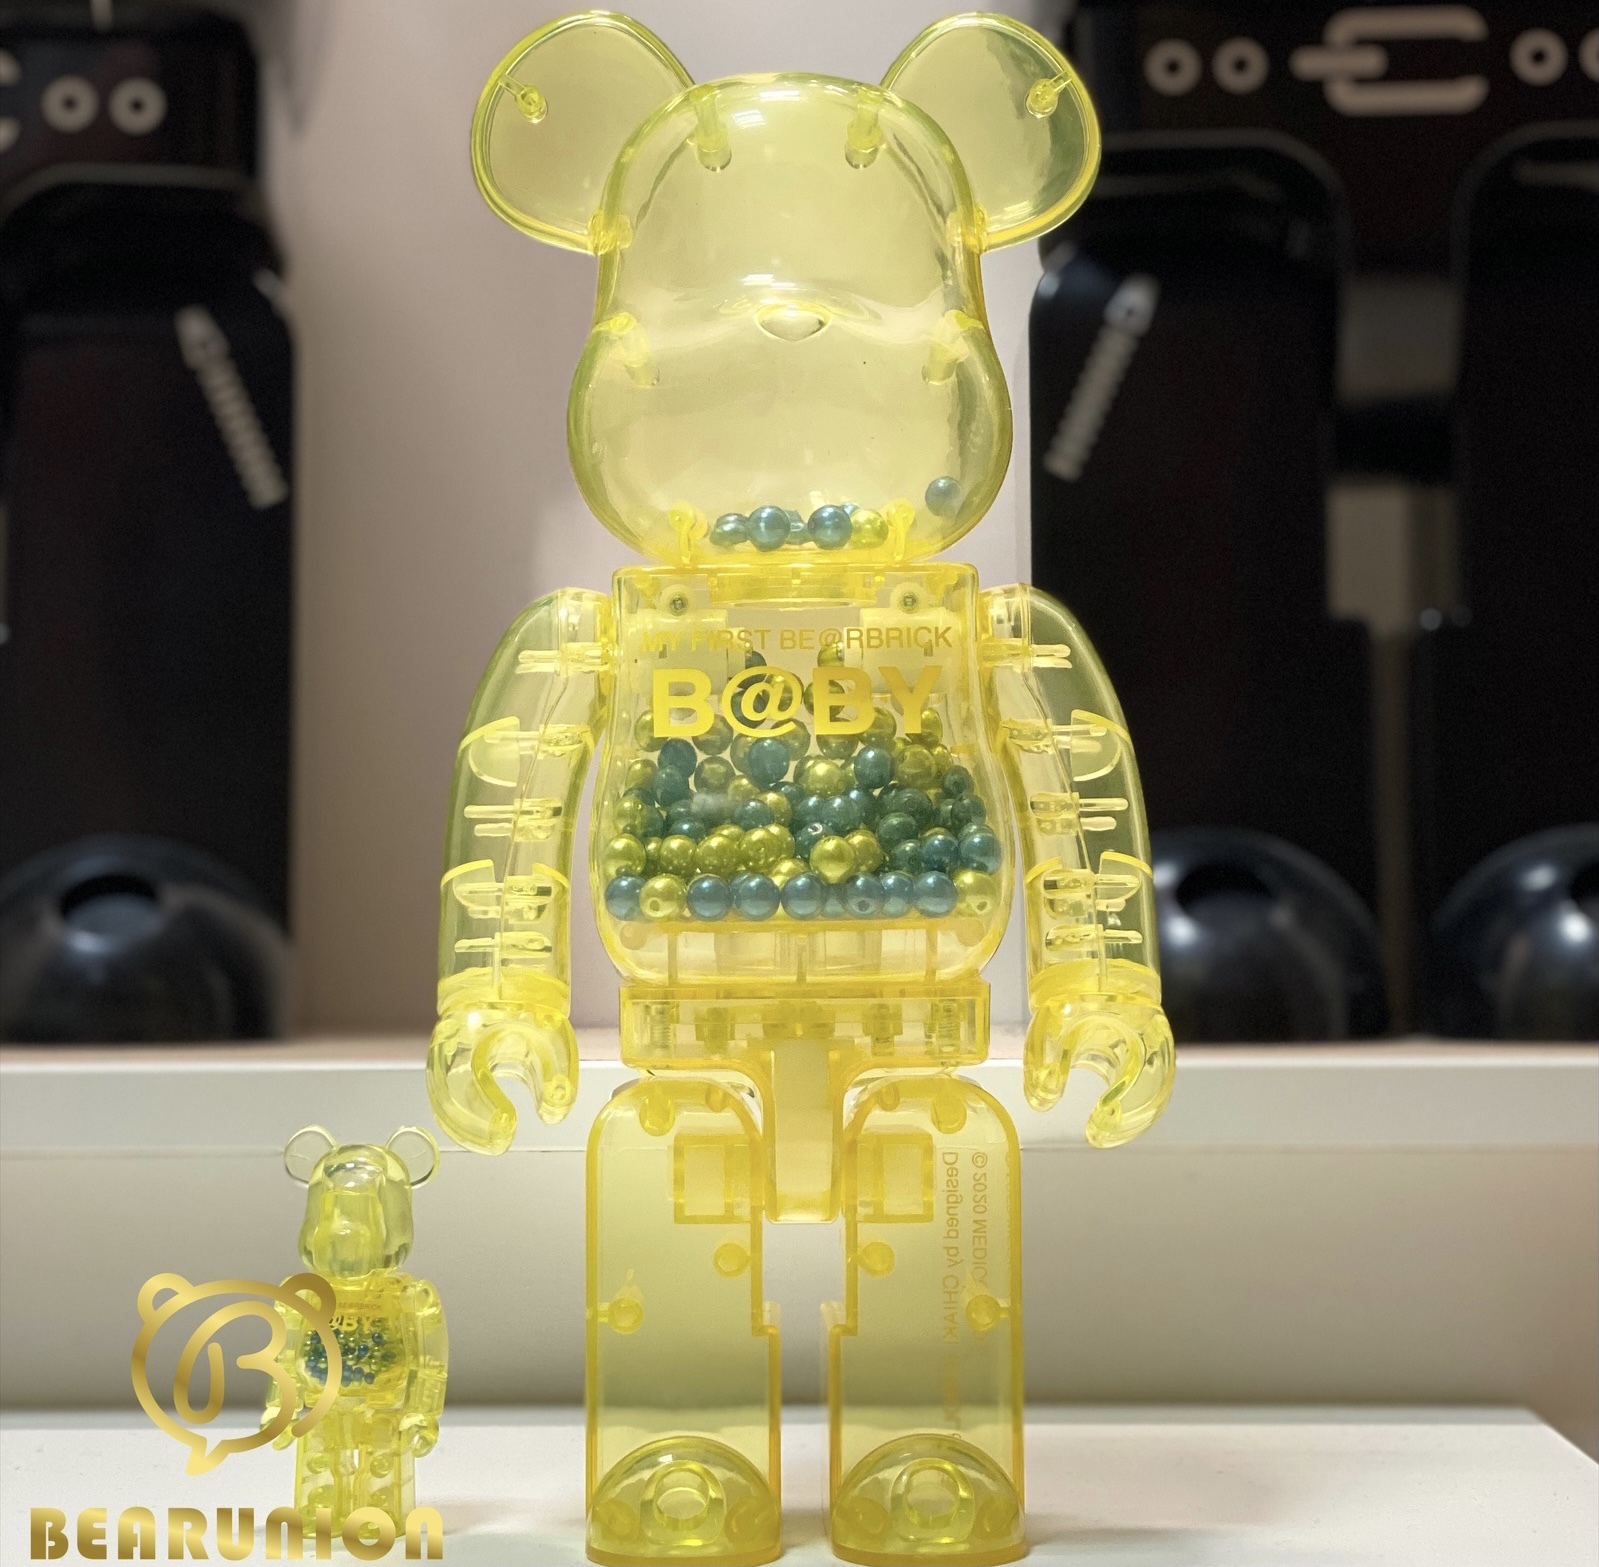 MY FIRST BE@RBRICK INNERSECT 100％ & 400％ | blog.cvpveiculos.com.br